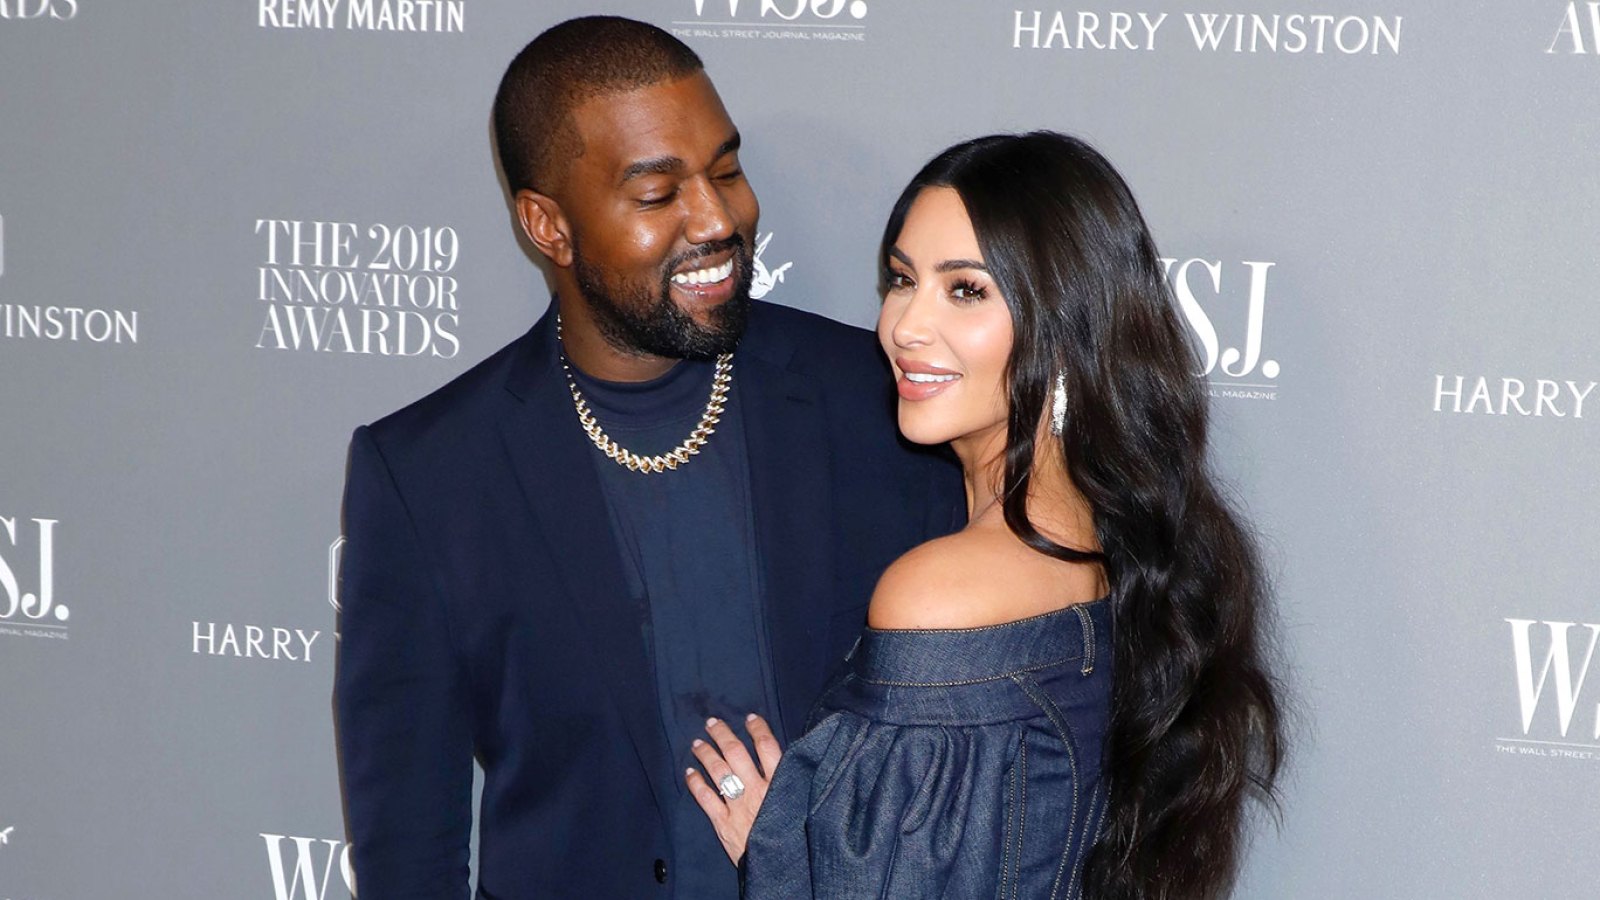 Kanye West calls out Kim Kardashian for being 'overly sexualized